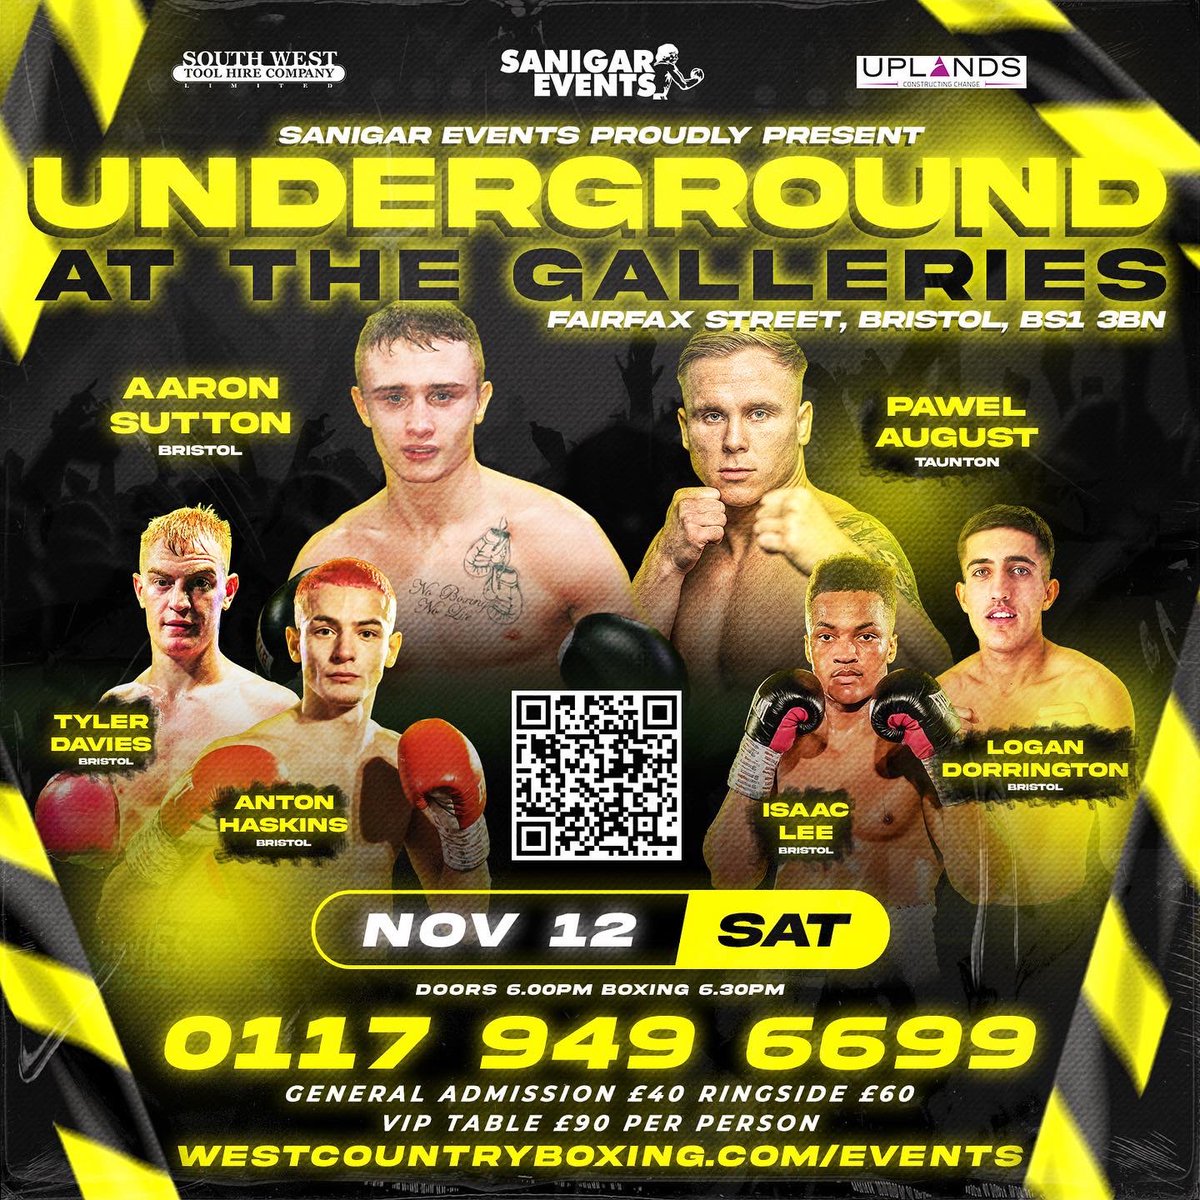 3 fights added to our stacked Bristol show on Saturday 12th November Underground at The Galleries Bristol featuring Torquay Heavyweight Harry Armstrong, Welsh Champion @LloydyG1 and Port Talbot’s Joshua John 🥊 🎟 Tickets on sale now westcountryboxing.com/events